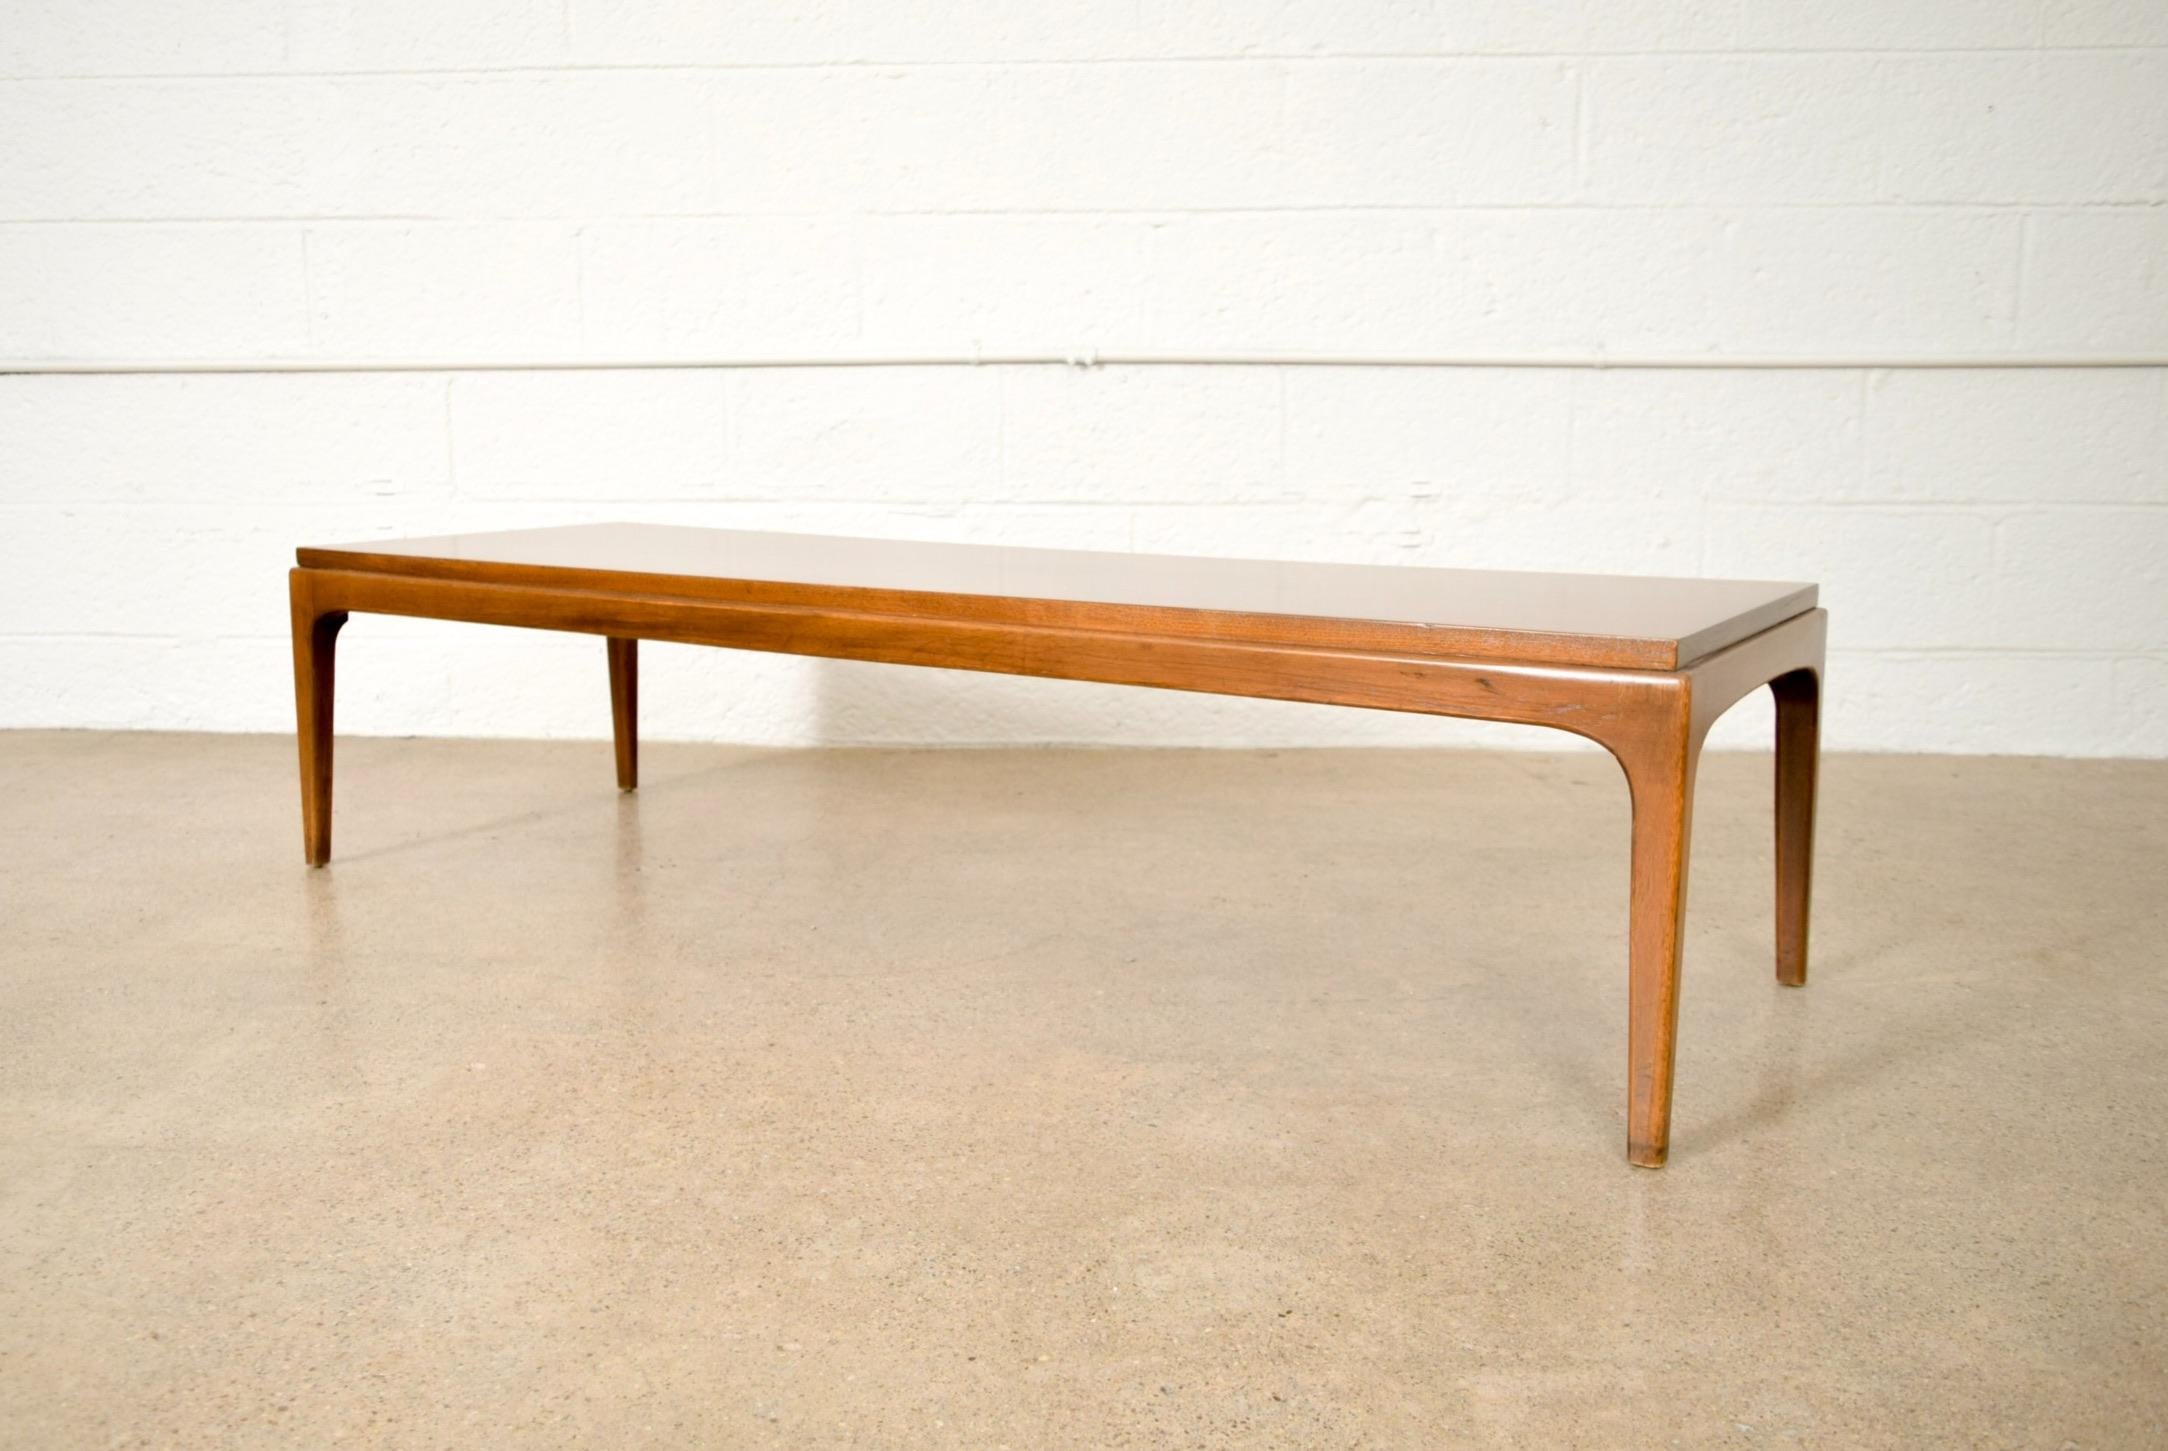 • Vintage Mid-Century Modern Lane rectangular coffee table from 1962.
• Simple, geometric lines and sleek low profile.
• Well constructed from walnut with beautiful inlaid tabletop edge and squared tapered legs.

Marked on underside:
Lane